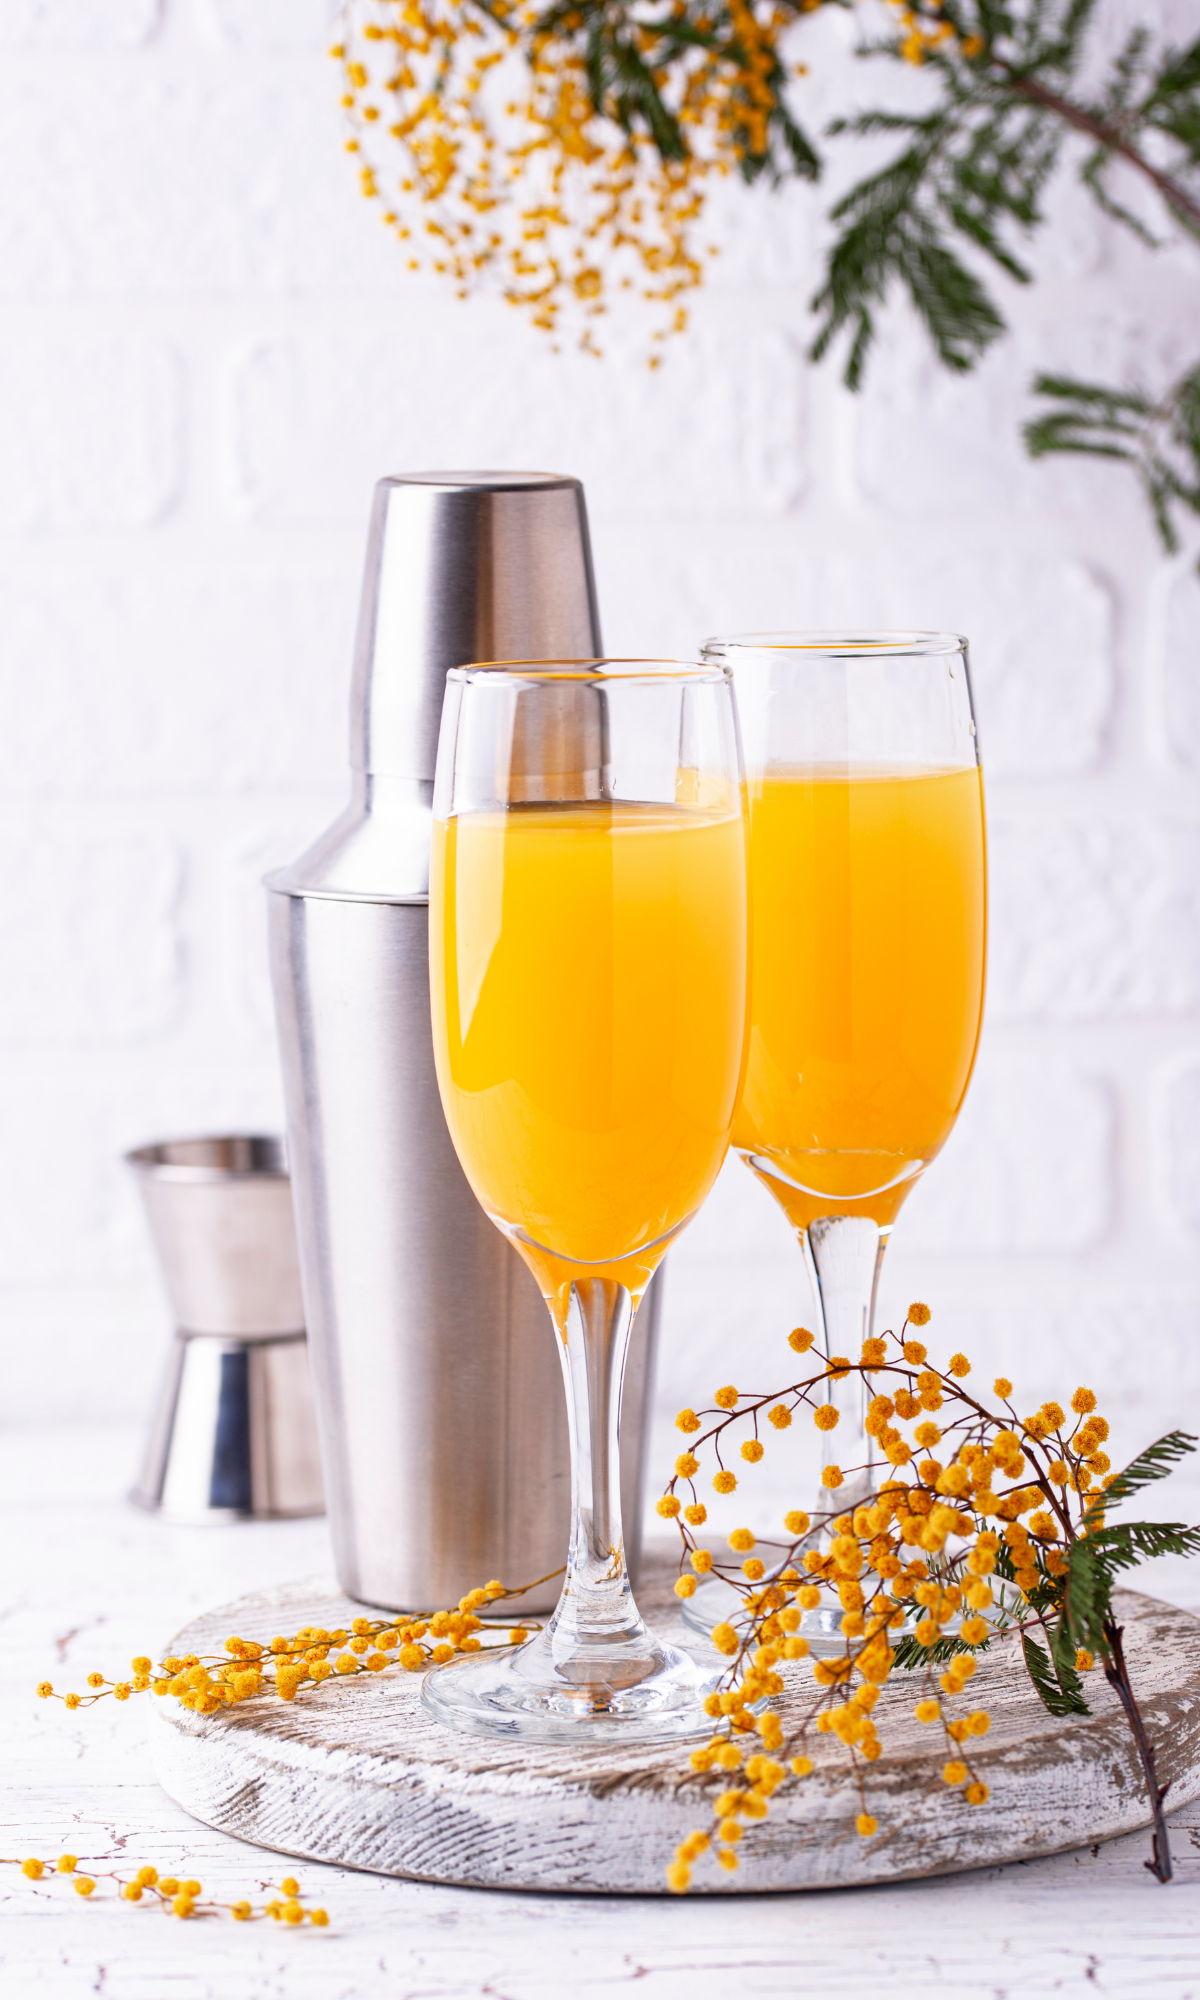 https://www.southerncravings.com/wp-content/uploads/2021/12/Mimosa-Recipe-2.png